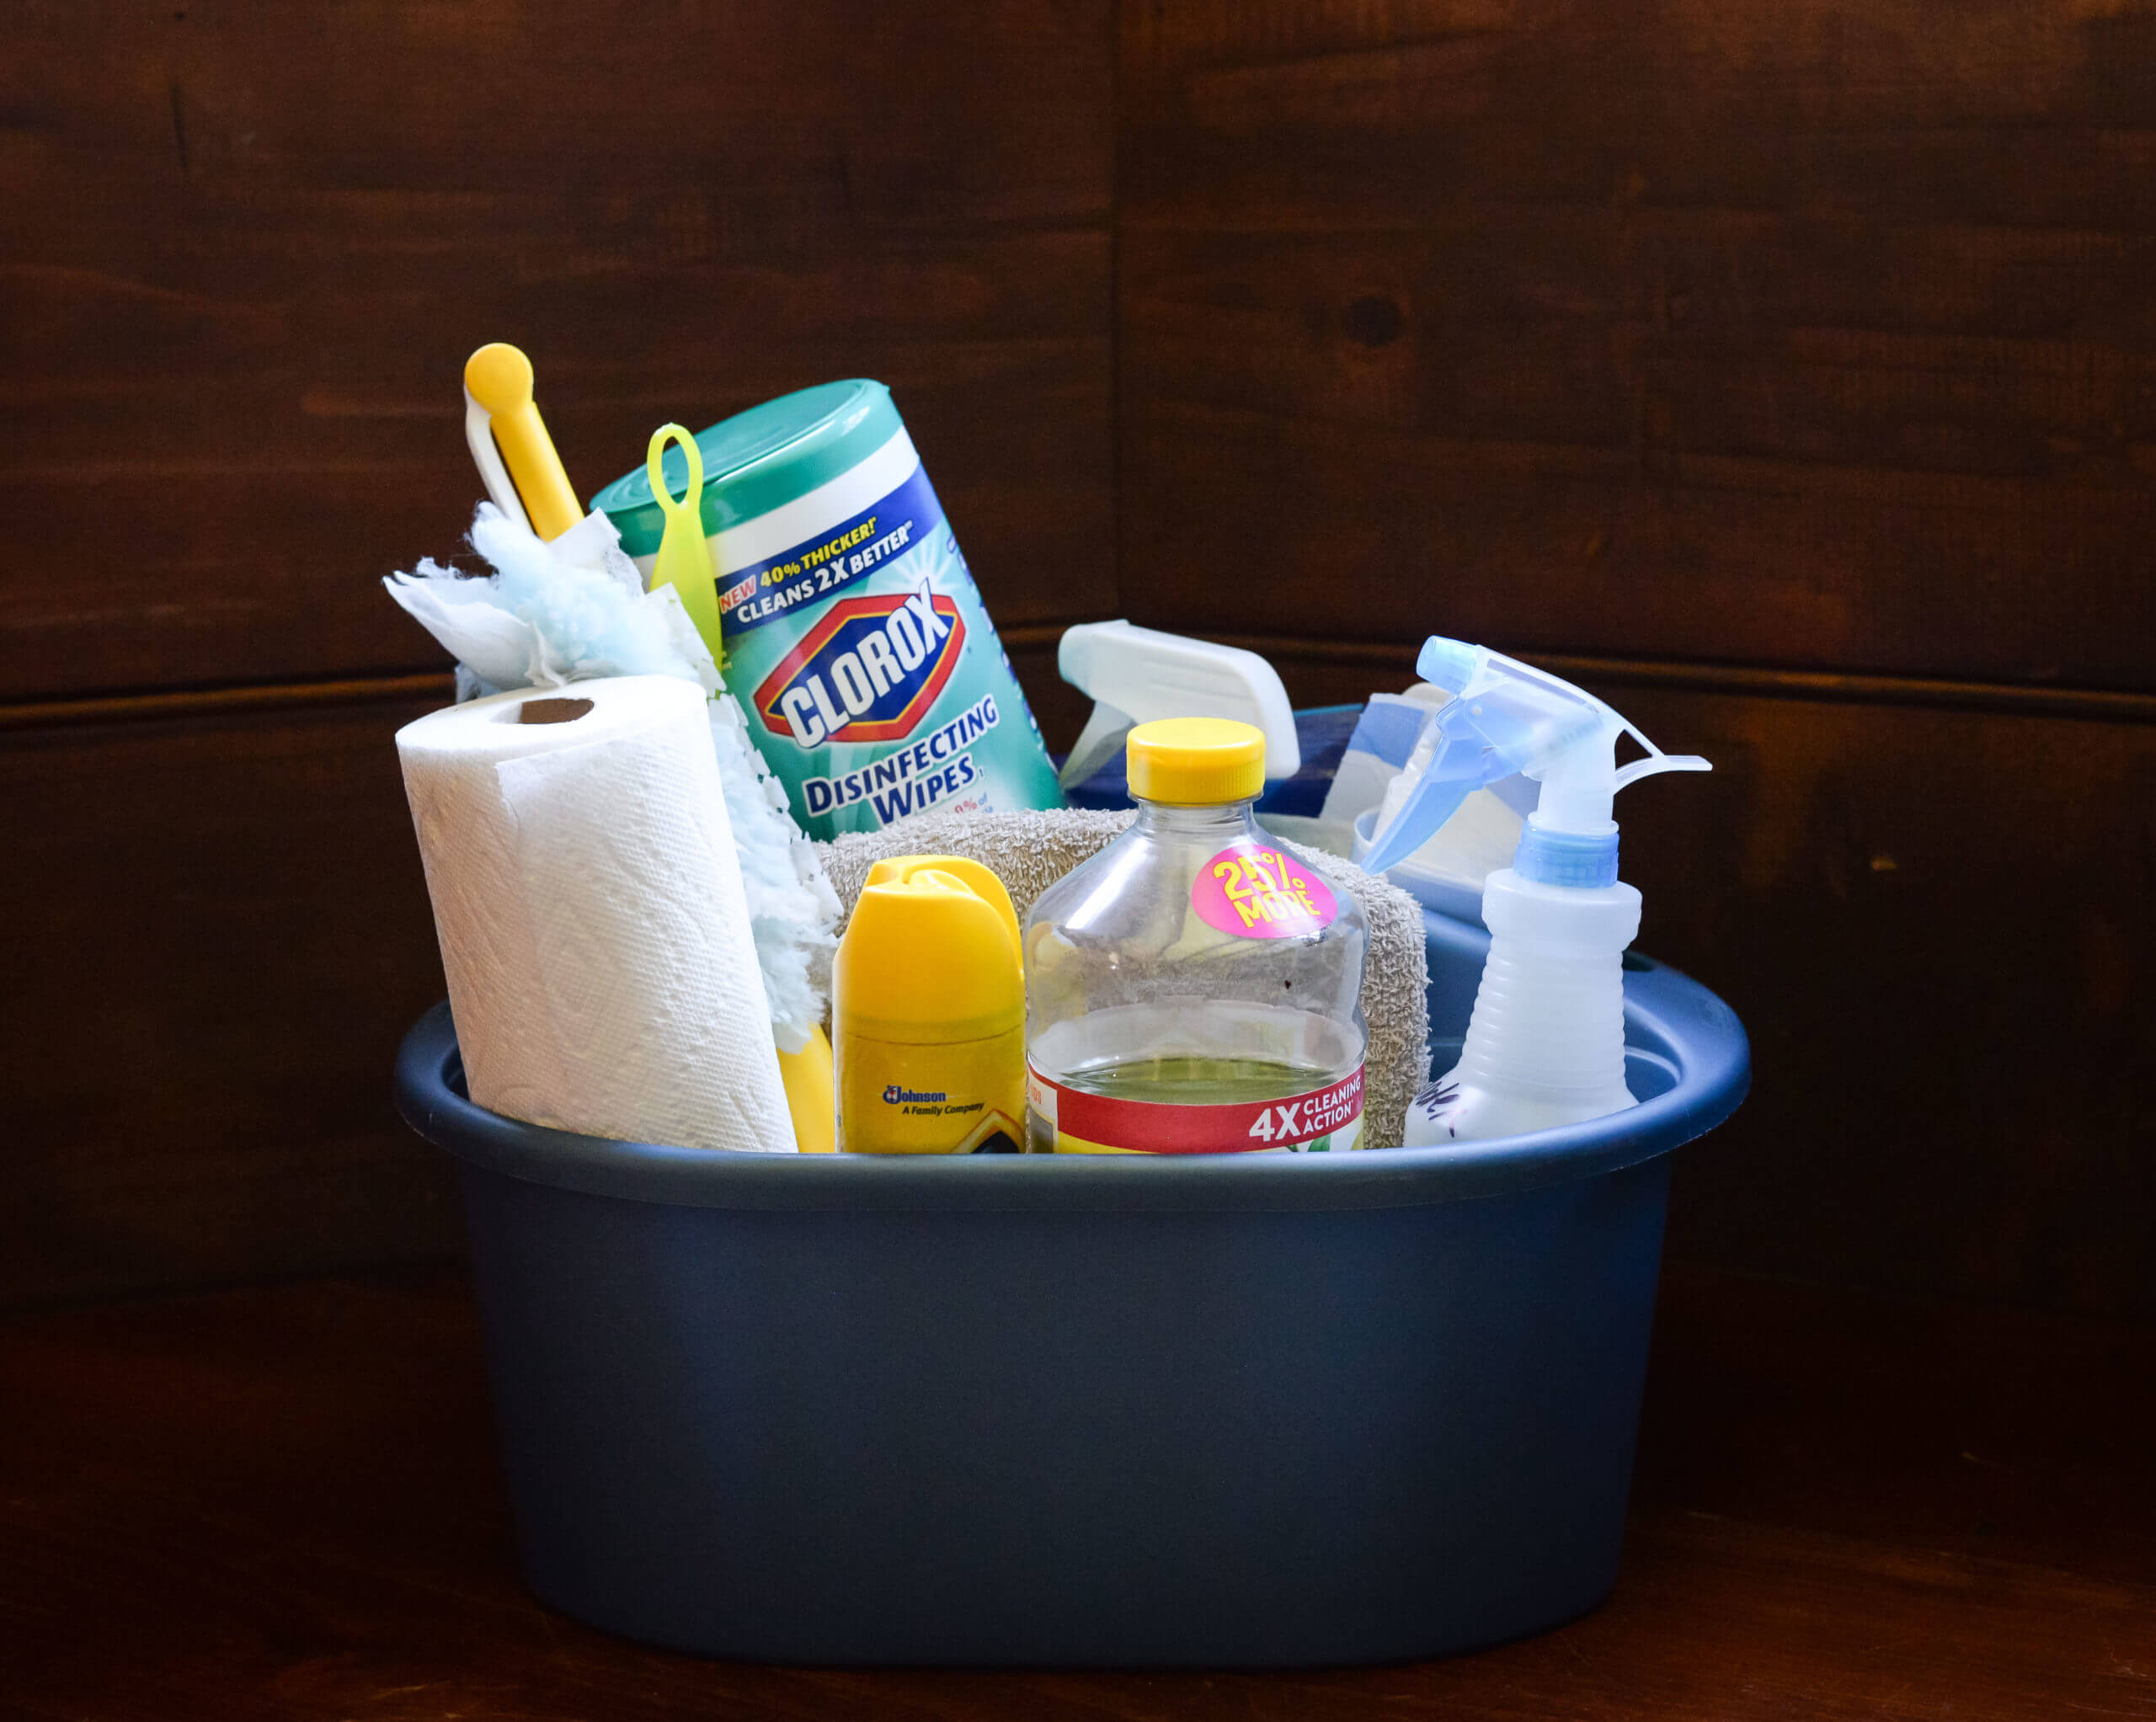 A plastic tub is filled with various cleaning supplies including Clorox wipes, paper towels, a duster, spray bottles, and rags.